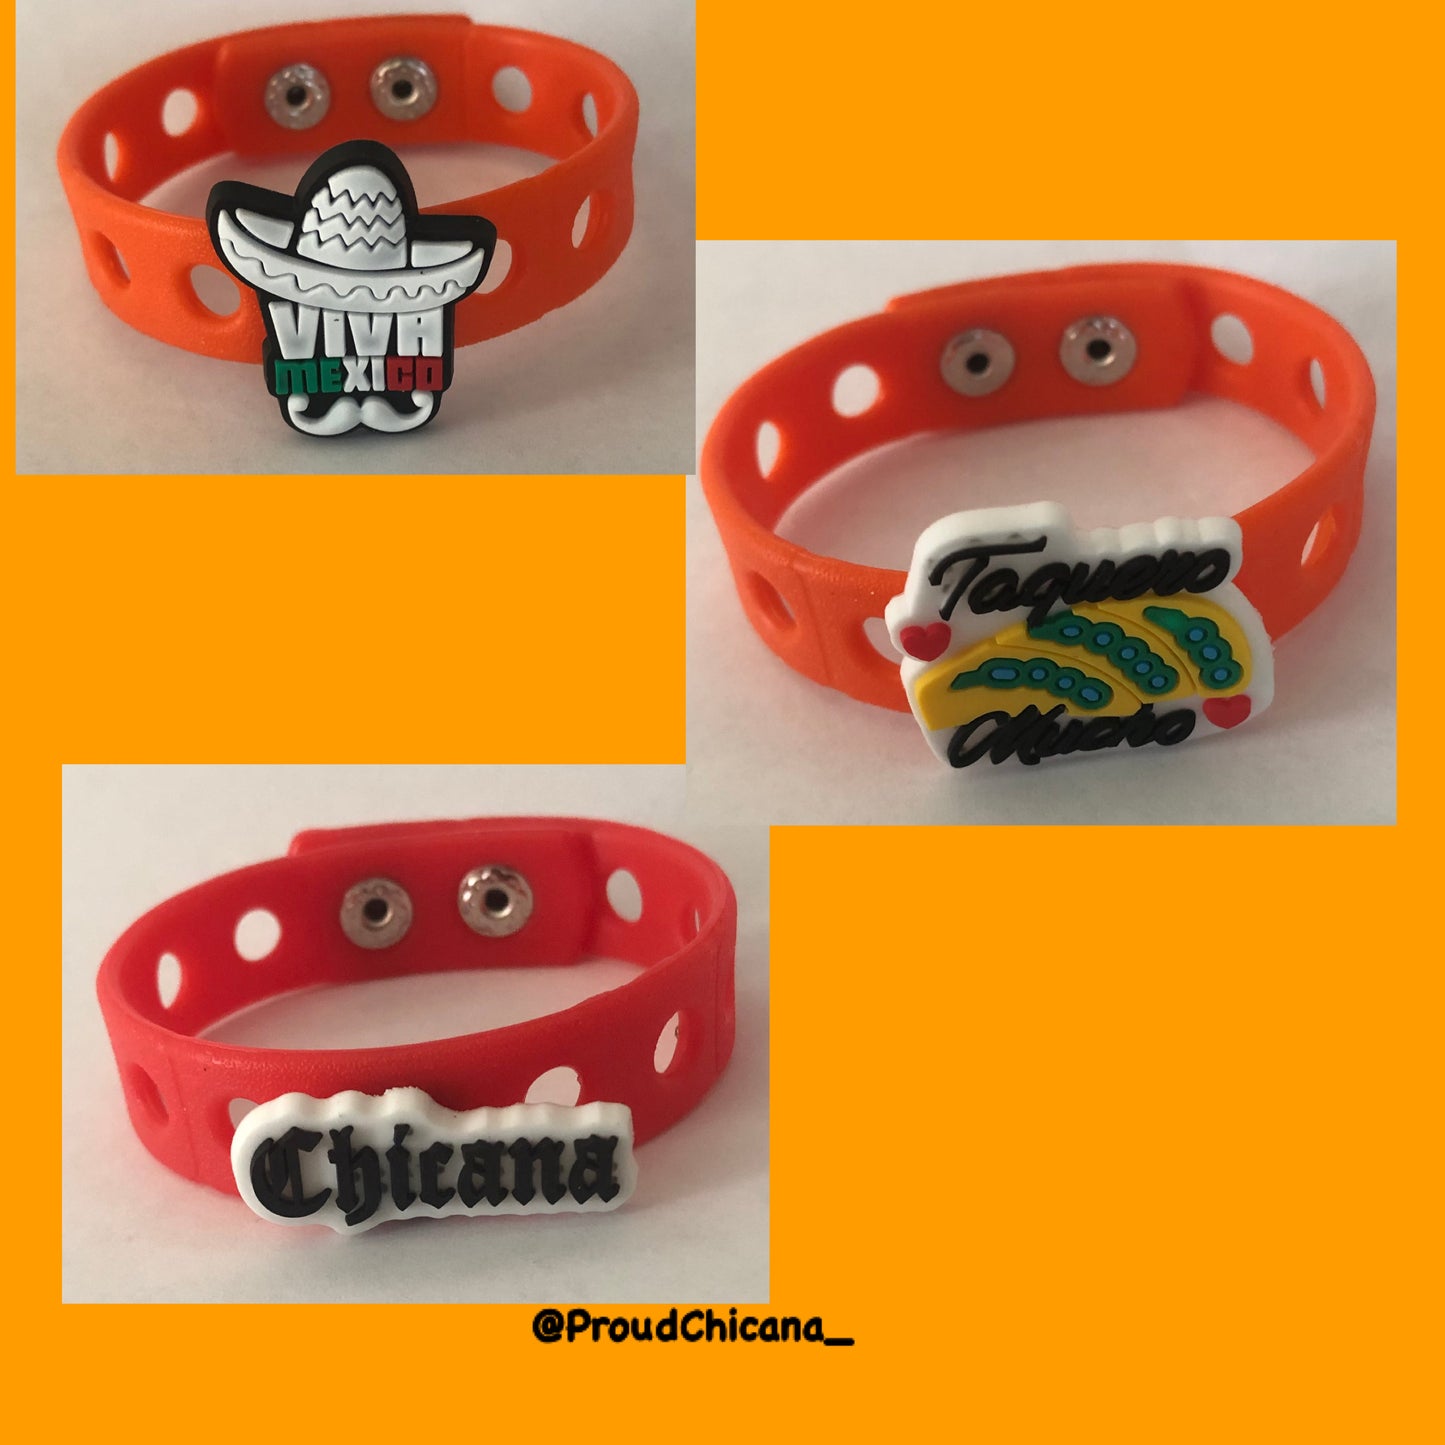 Croc charm bracelets | Latino, Mexican, and Chicano charms